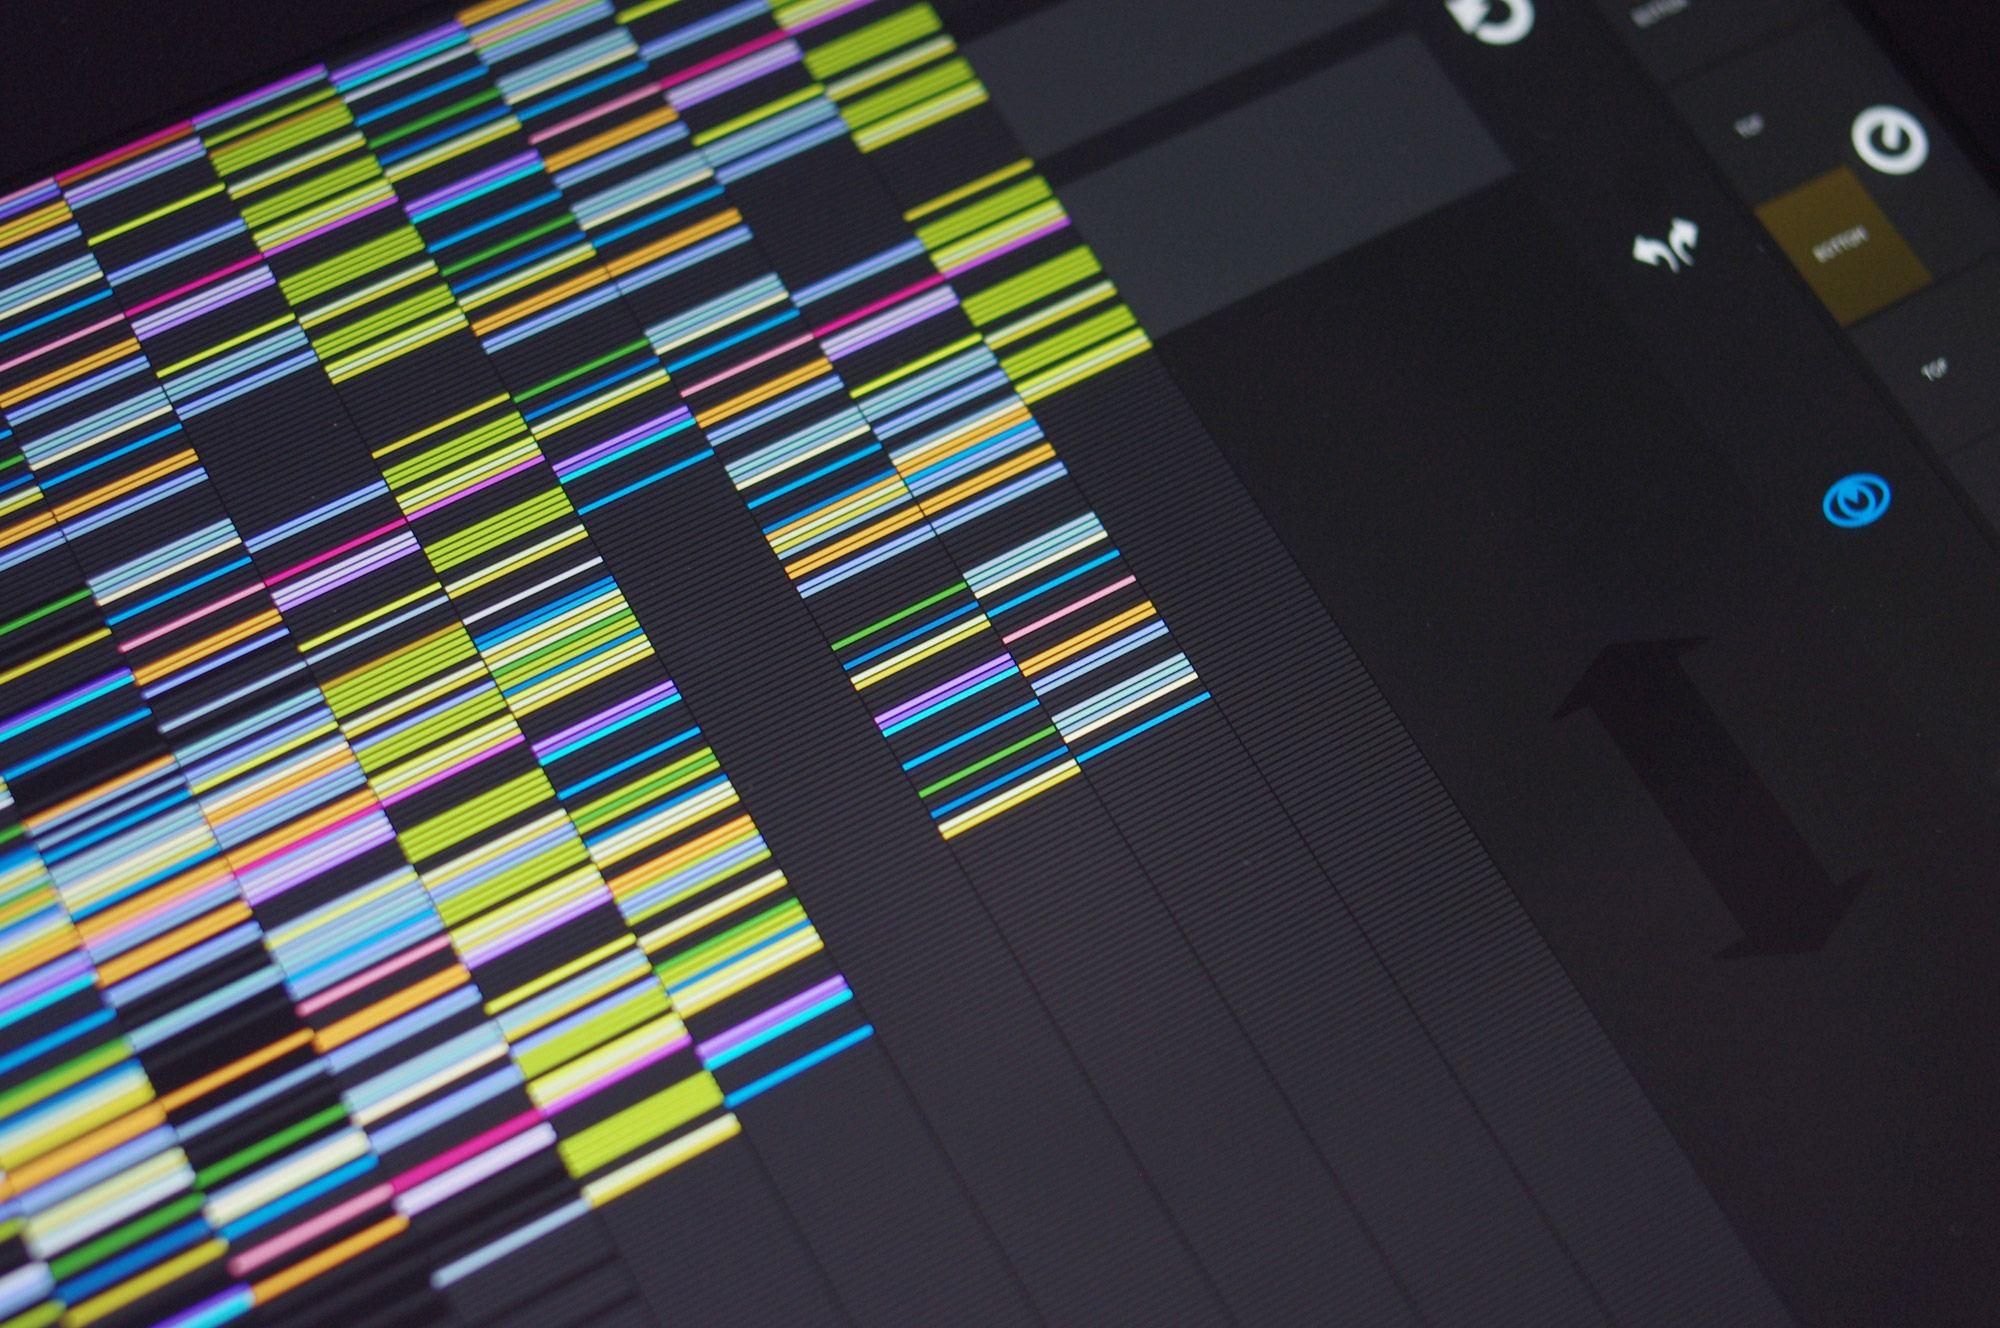 TouchAble 2 Puts Ableton Live Beneath Your Fingers: Gallery, Video